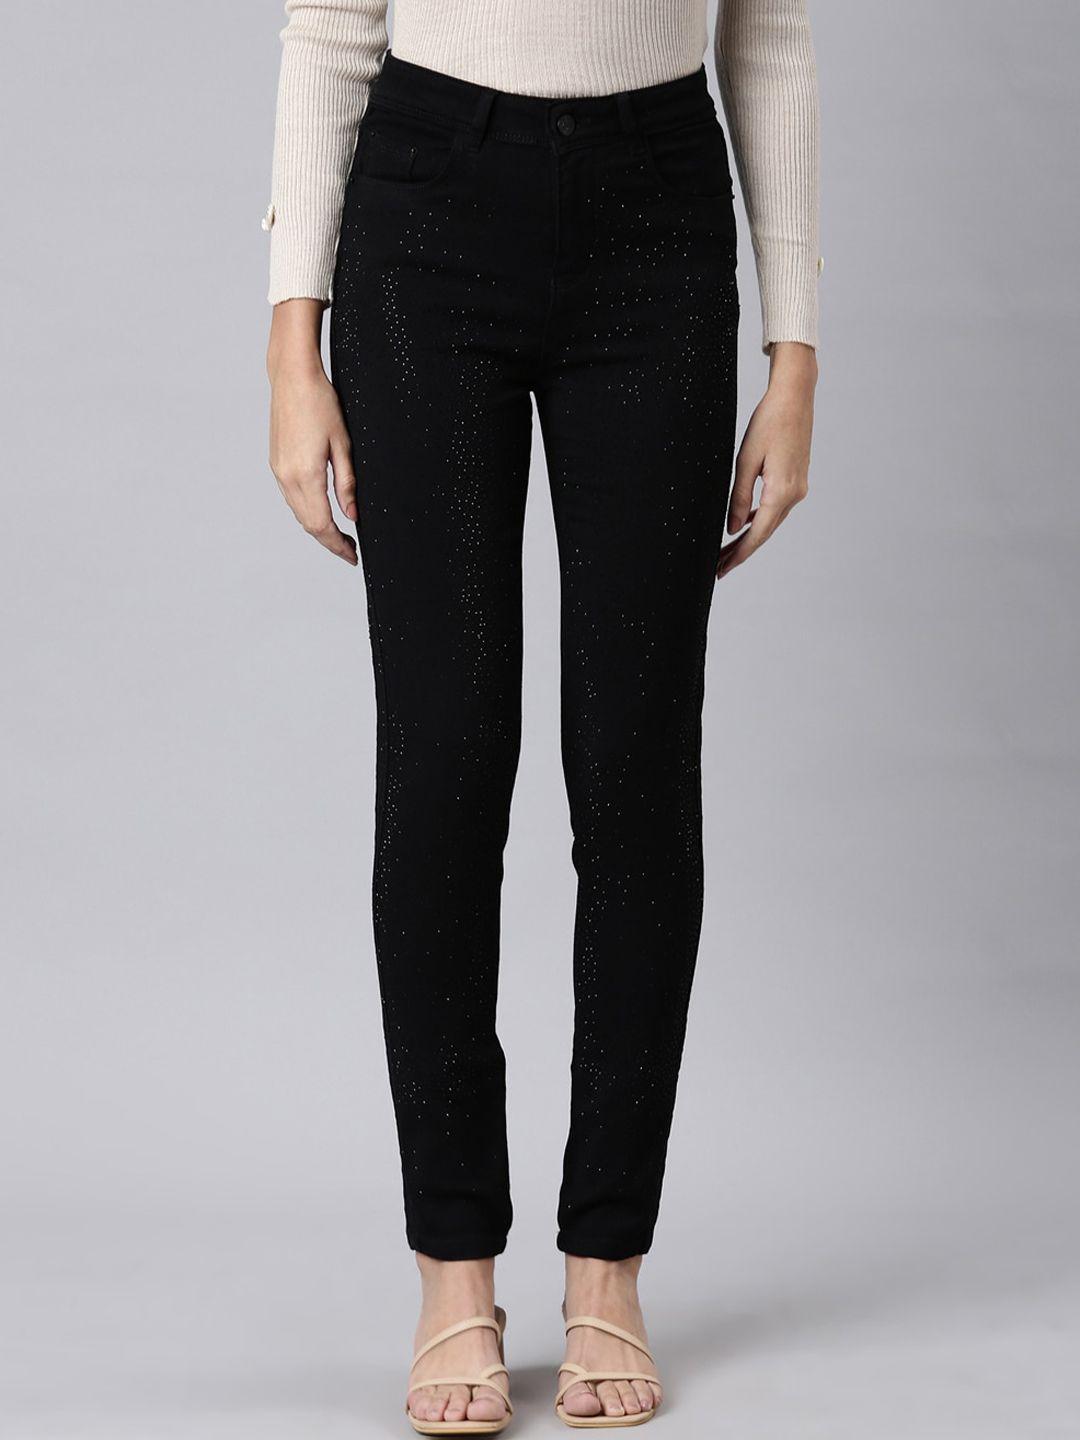 showoff-women-jean-slim-fit-high-rise-embellished-stretchable-cropped-jeans